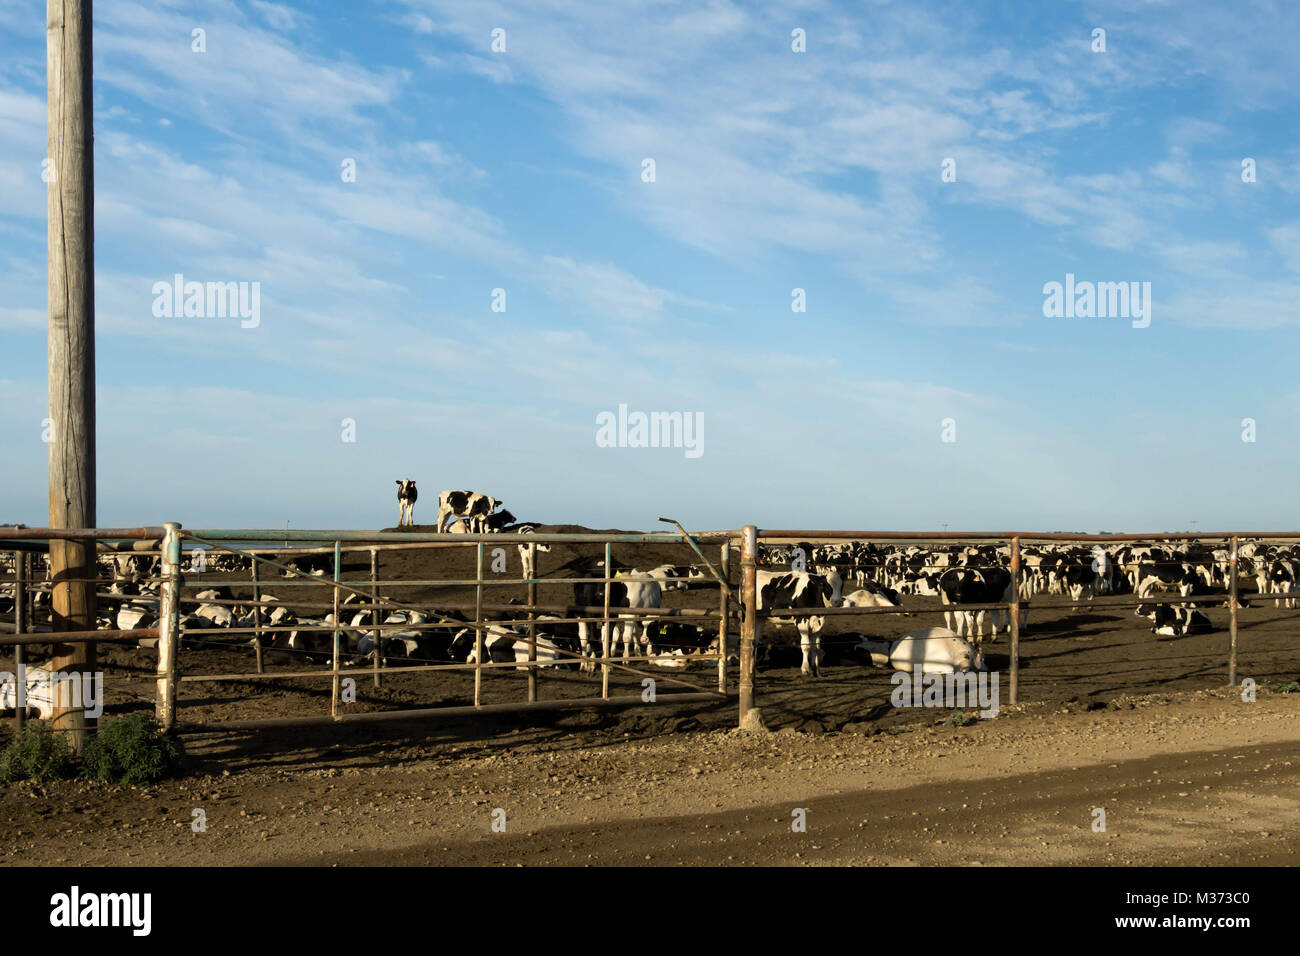 many cows fenced in and waiting to be butchered at a slaughterhouse Stock Photo